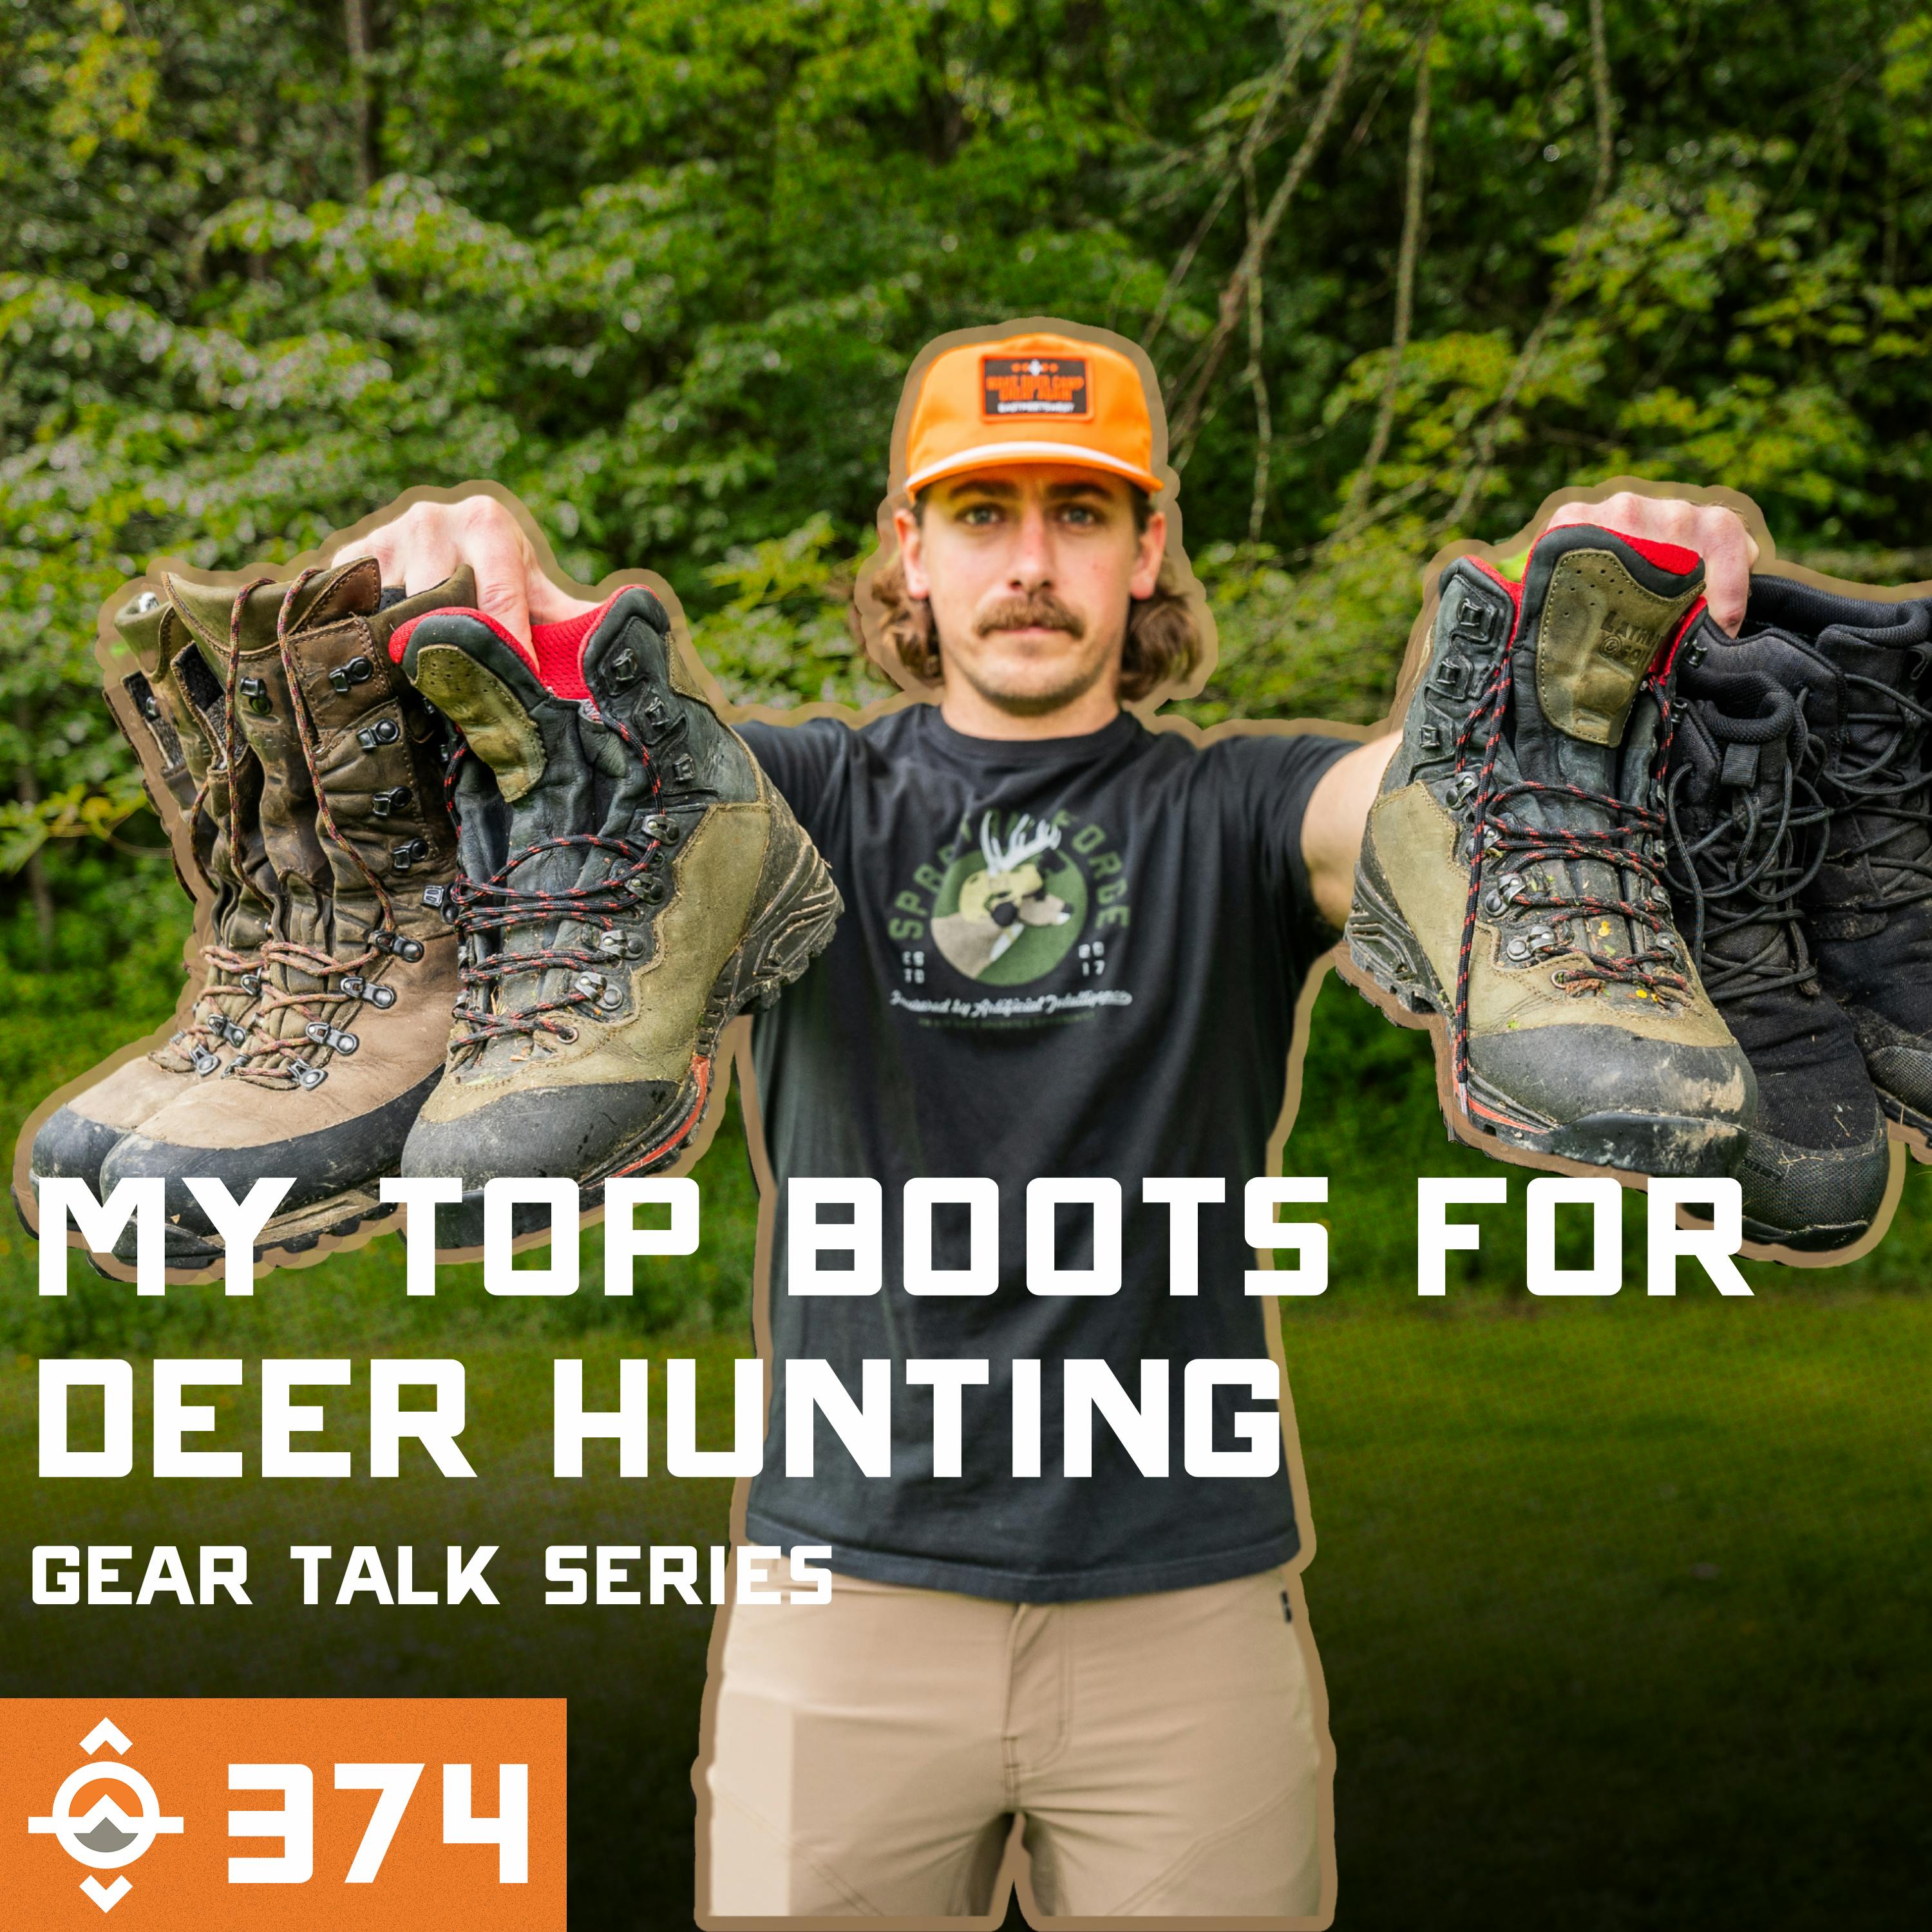 Ep. 374: My Top Boots for Deer Hunting - Early, Mid, and Late Season - Gear Talk Series